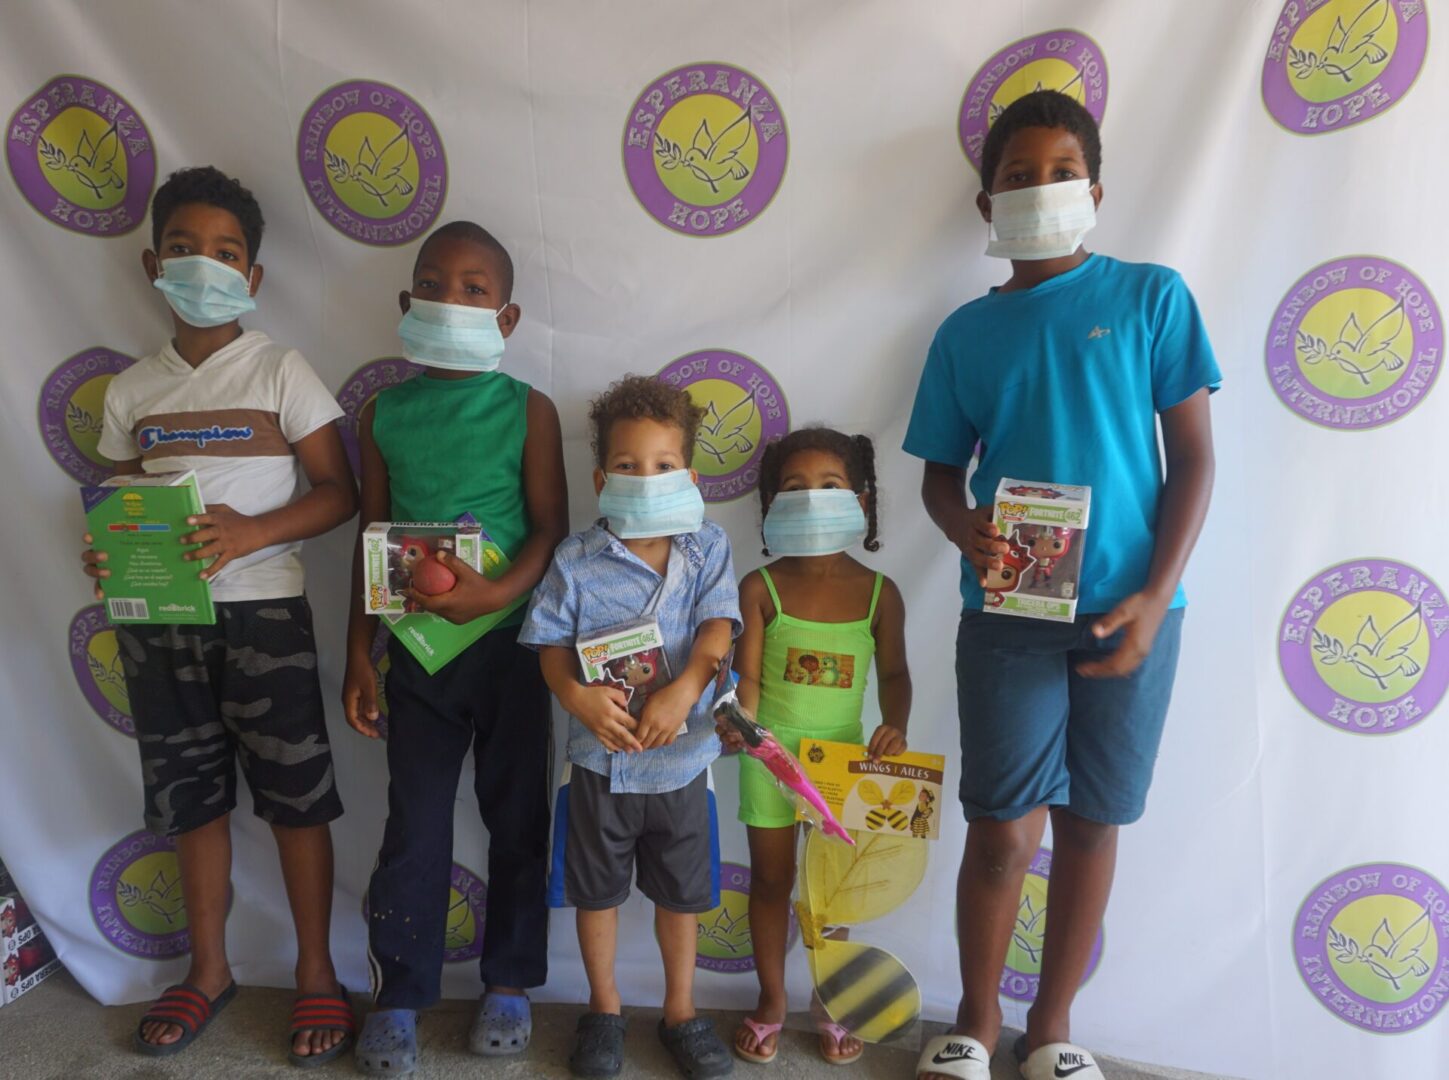 Five children standing against the Esperanza-Hope backdrop with their toys and books